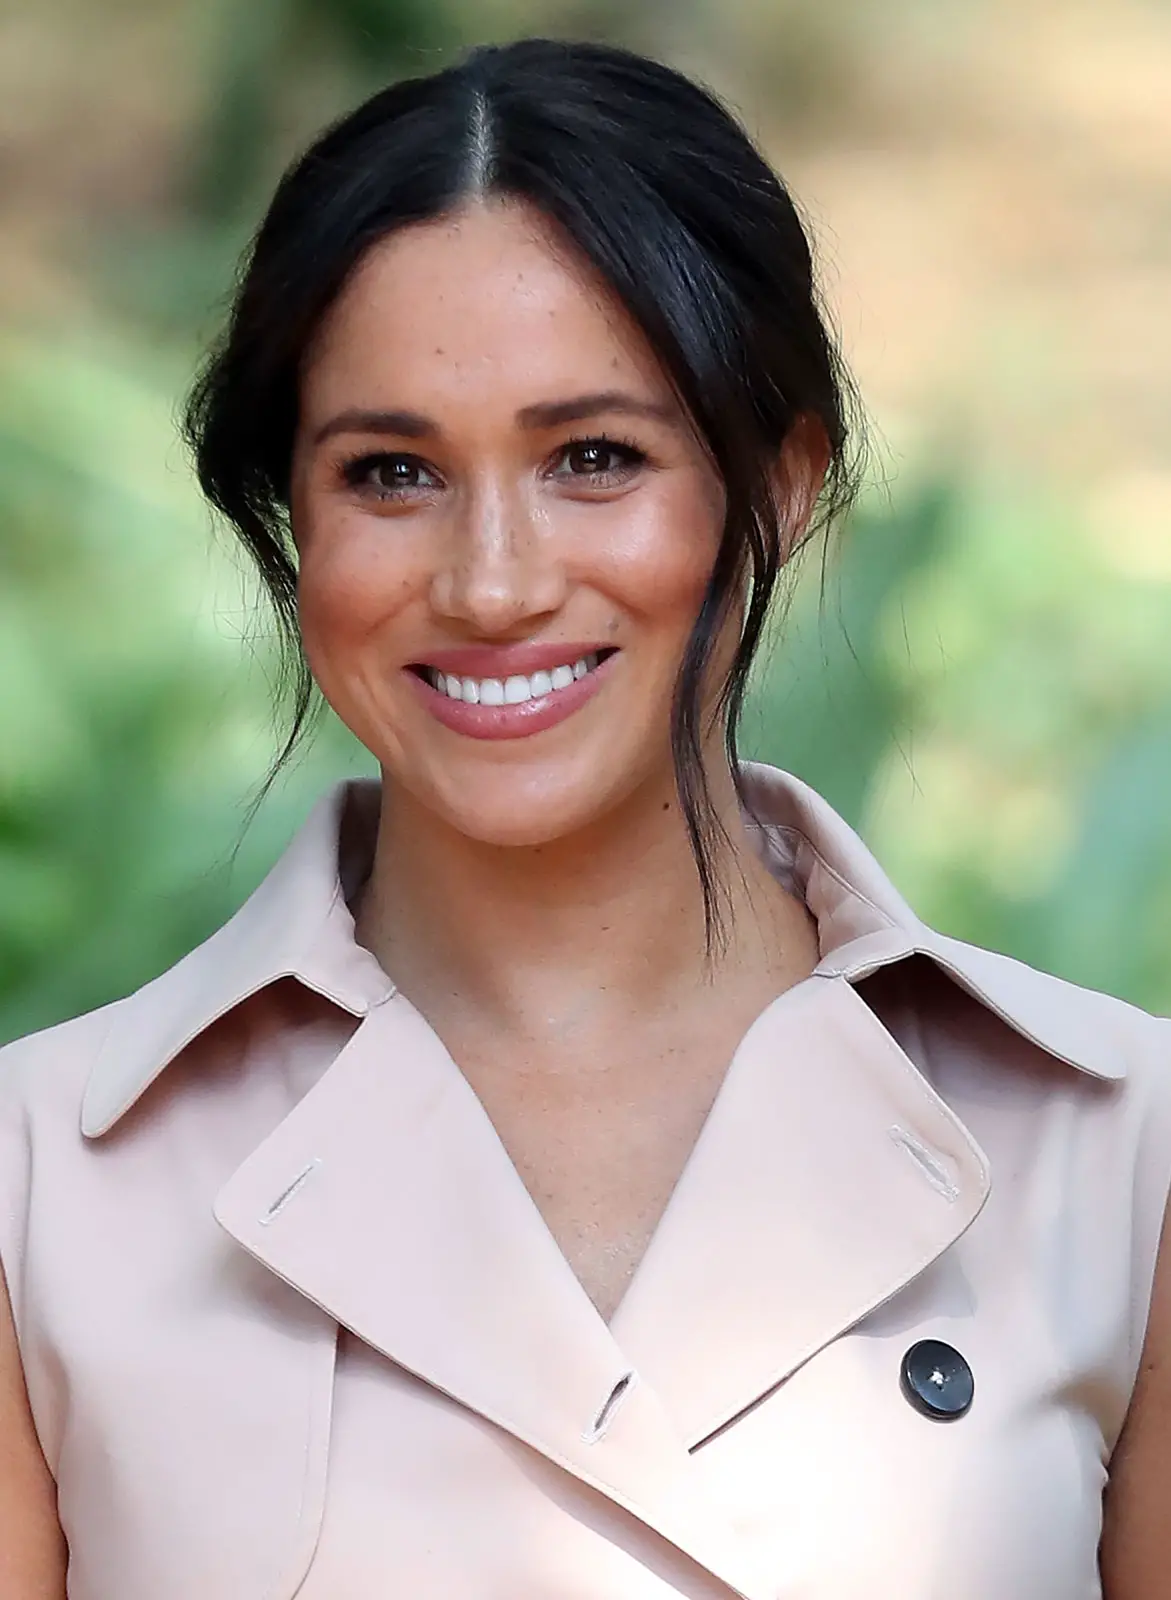 Duchess-of-Sussex-Meghan-Markle-2019